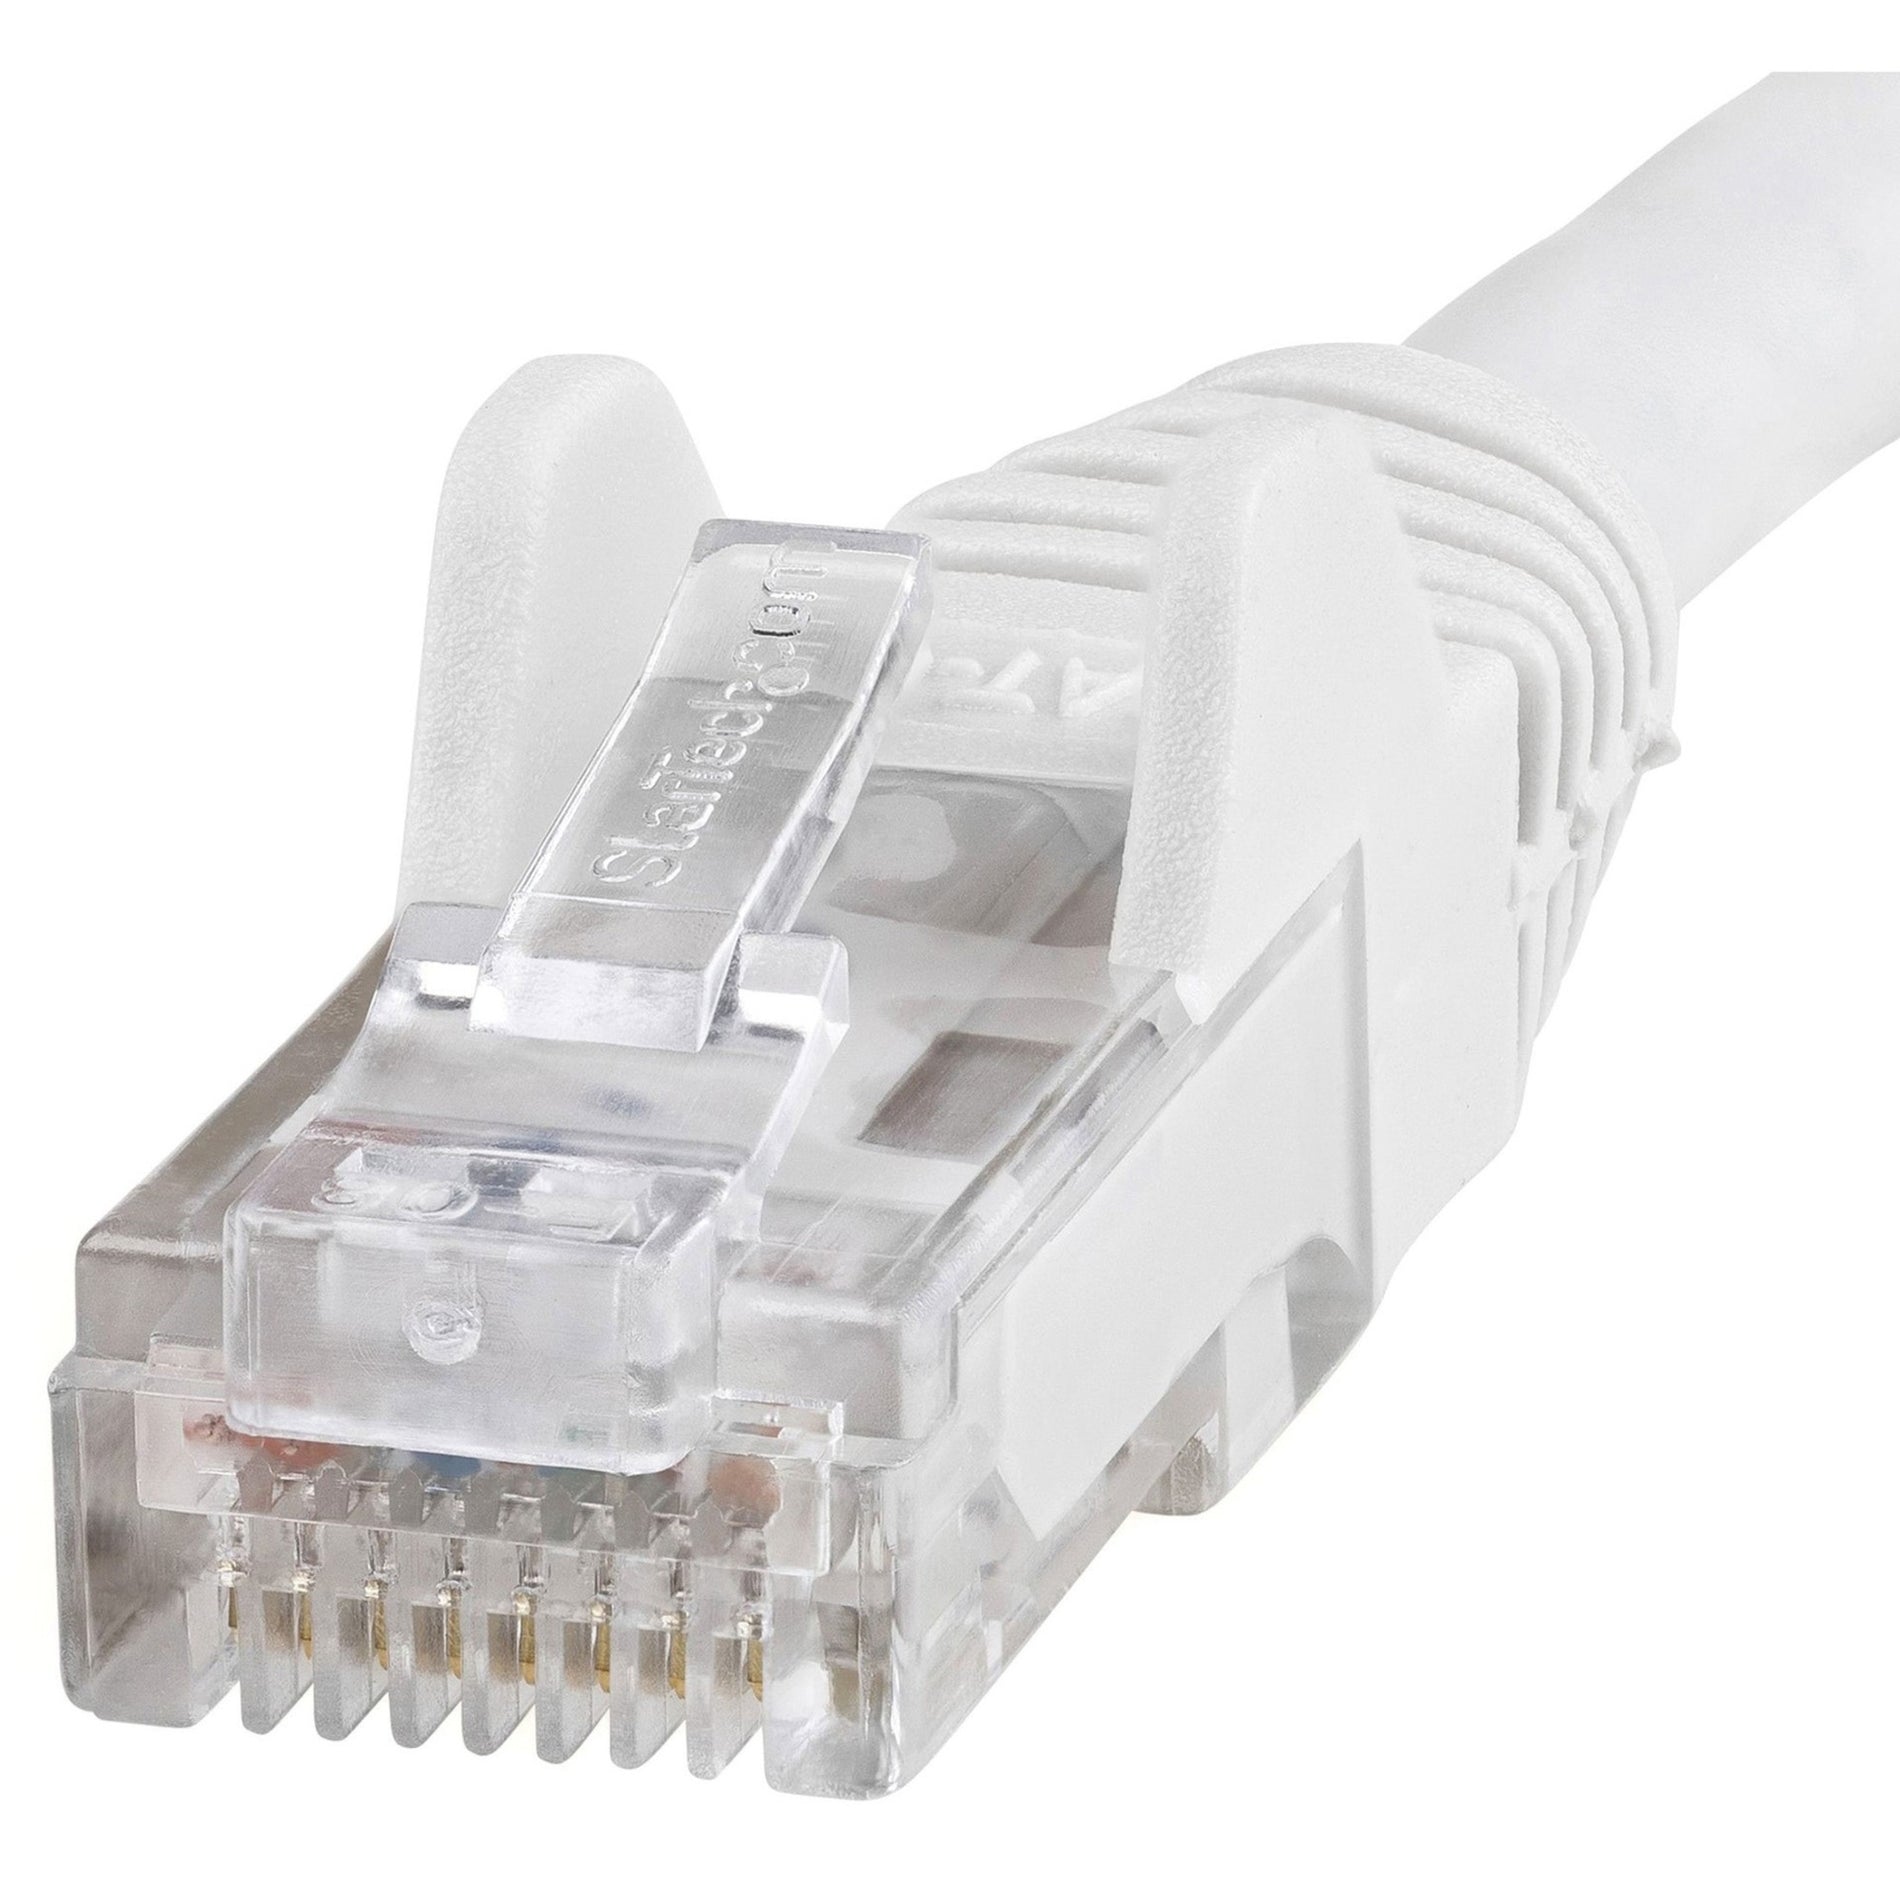 StarTech.com N6PATCH14WH Cat6 Patch Cable, 14ft White Ethernet Cable, Snagless RJ45 Connectors